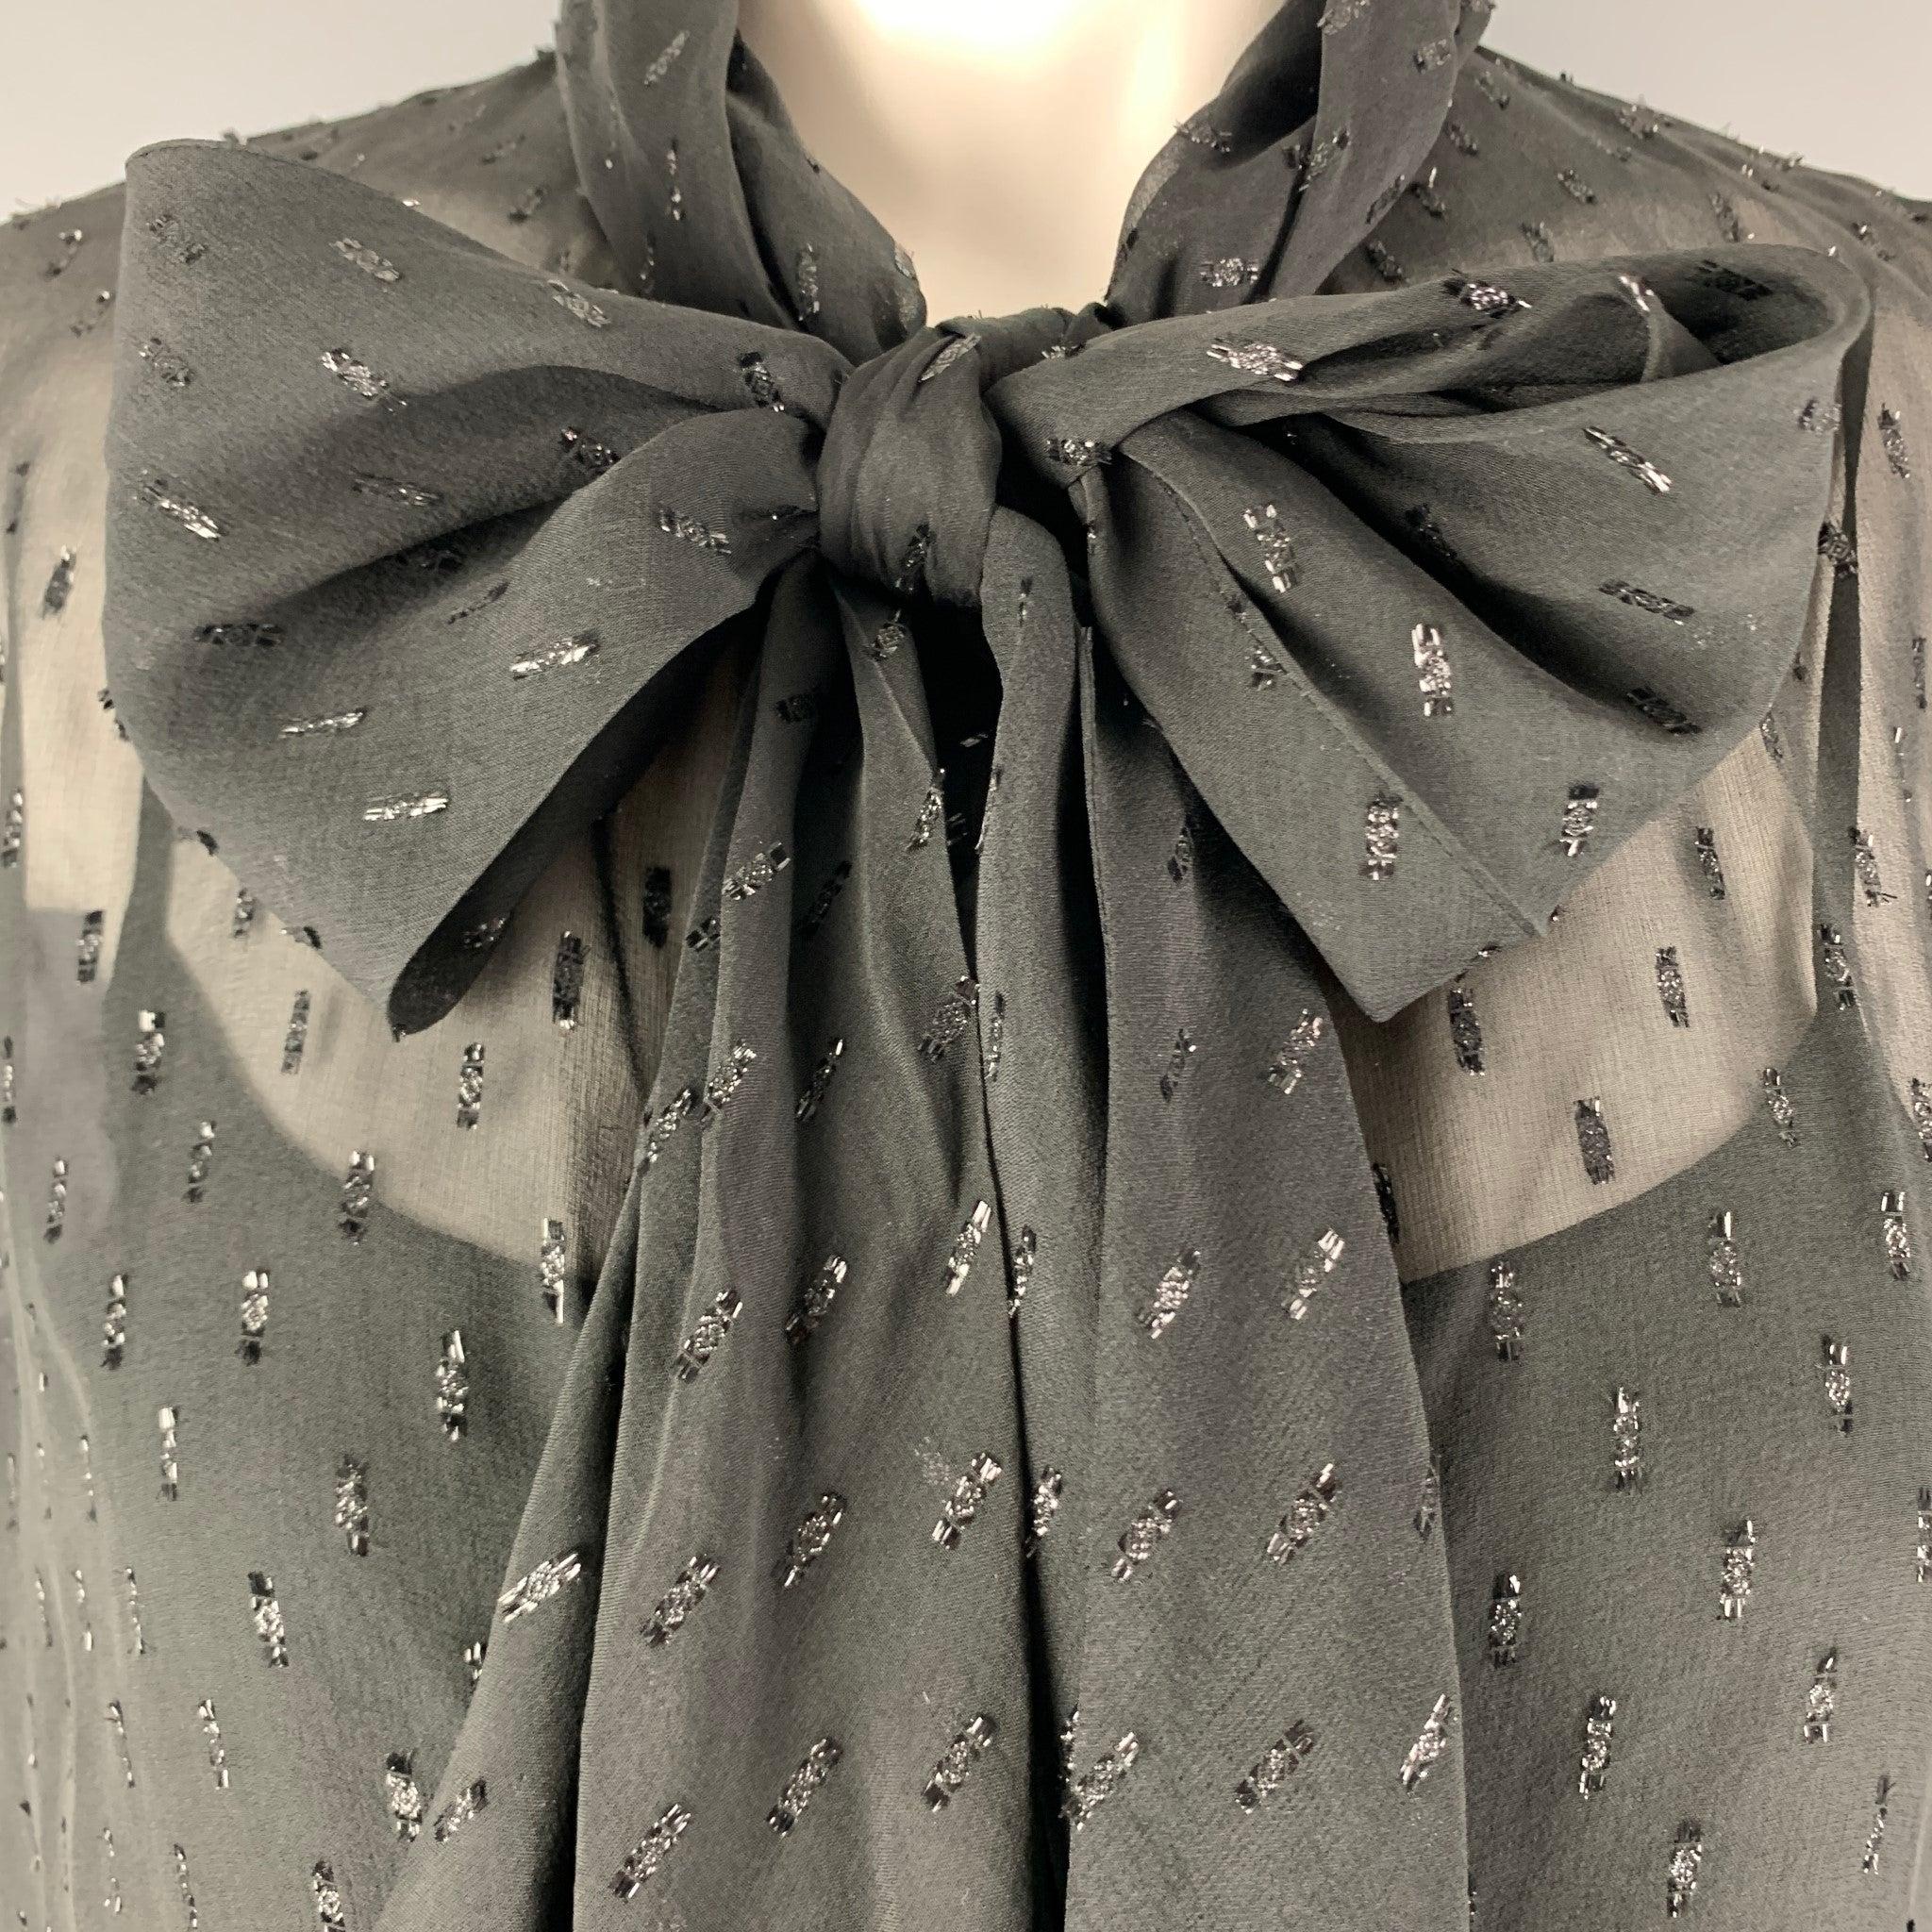 THEORY shift dress comes in a black woven material featuring a novelty shiny texture, and bow tie around neck.
Including slip dress as lining.Excellent Pre-Owned Condition. 

Marked:  2 

Measurements: 
 
Shoulder: 16 inches Sleeves: 24 inches Bust: